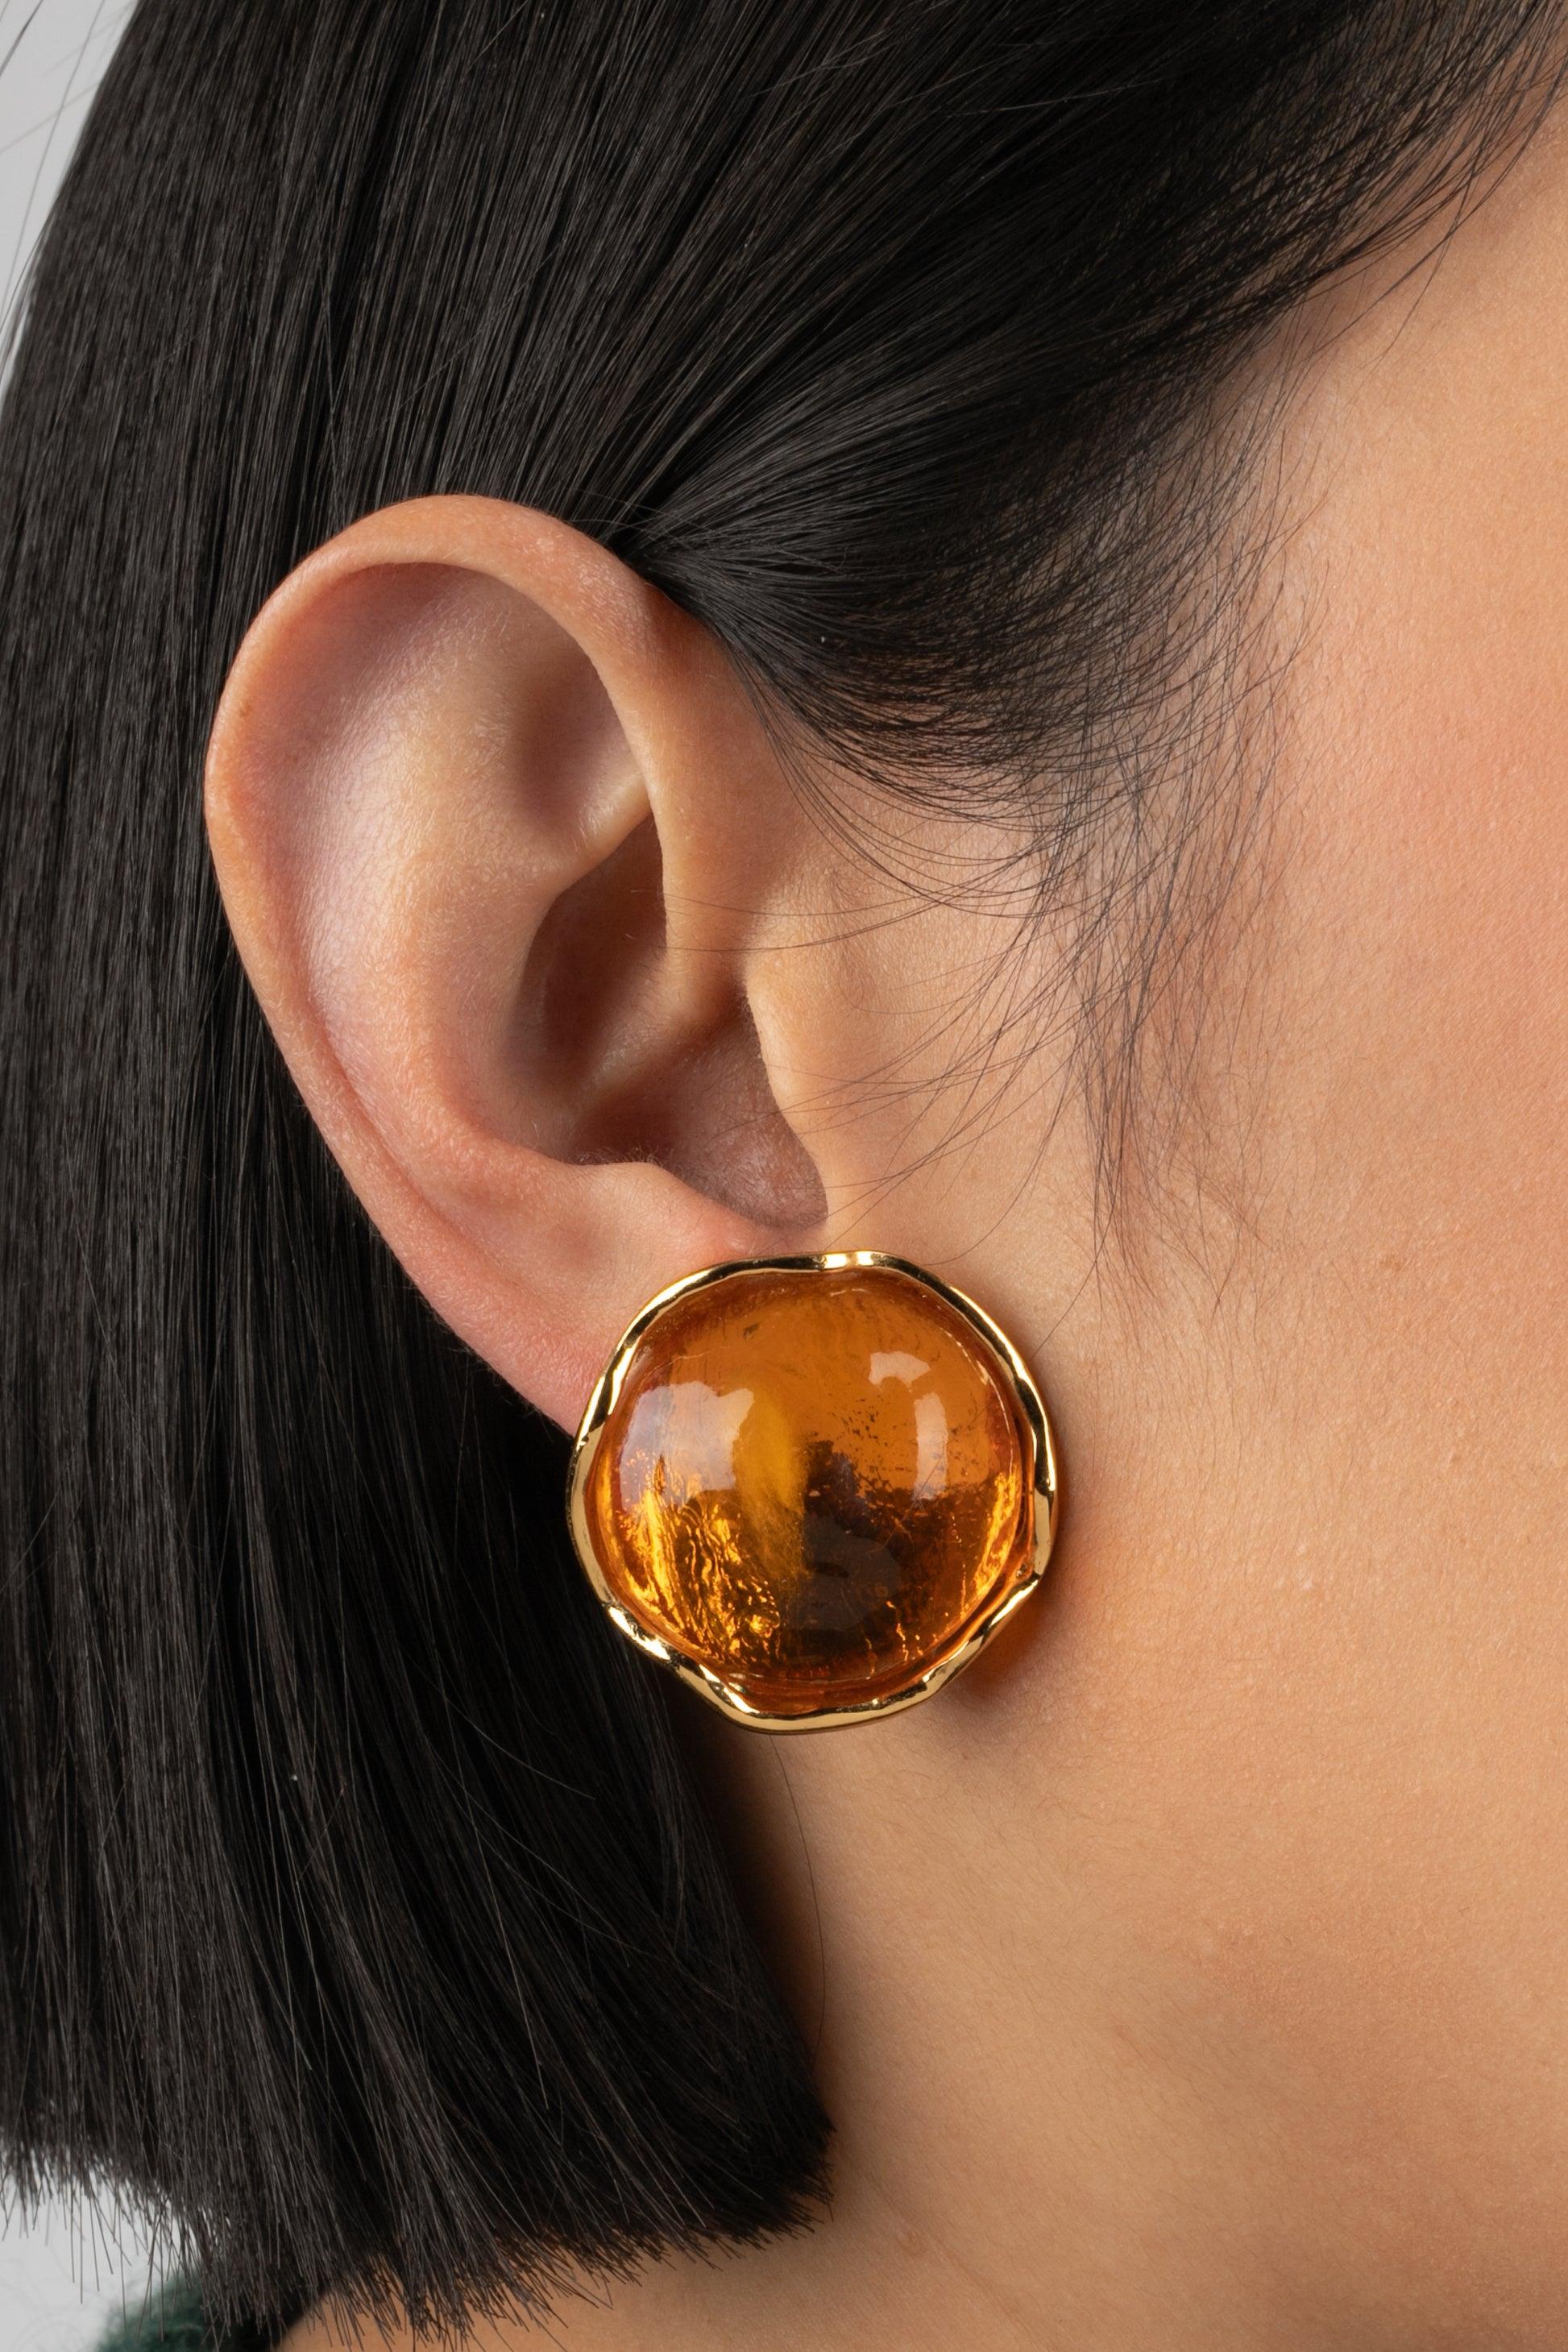 Yves Saint Laurent - (Made in France) Golden metal clip-on earrings with orange resin.

Additional information:
Condition: Very good condition
Dimensions: Height: 3 cm

Seller Reference: BO167
